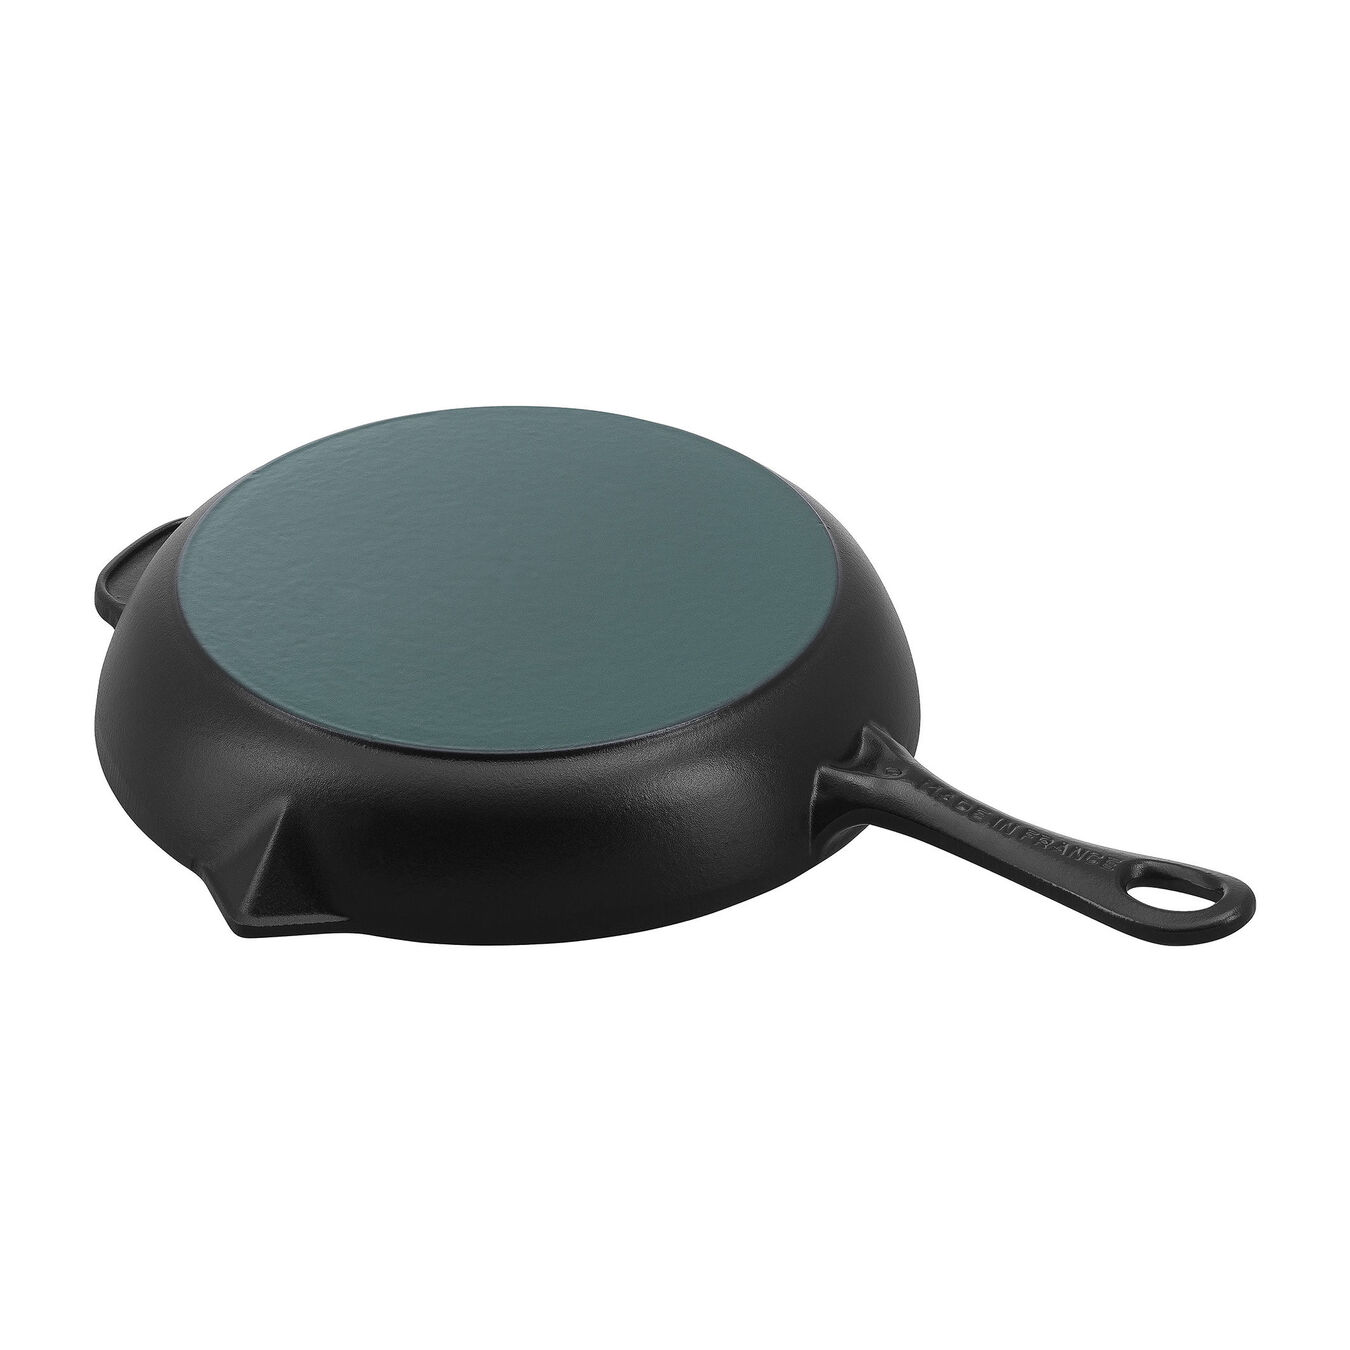 26 cm / 10 inch cast iron Frying pan with pouring spout, black - Visual Imperfections,,large 2